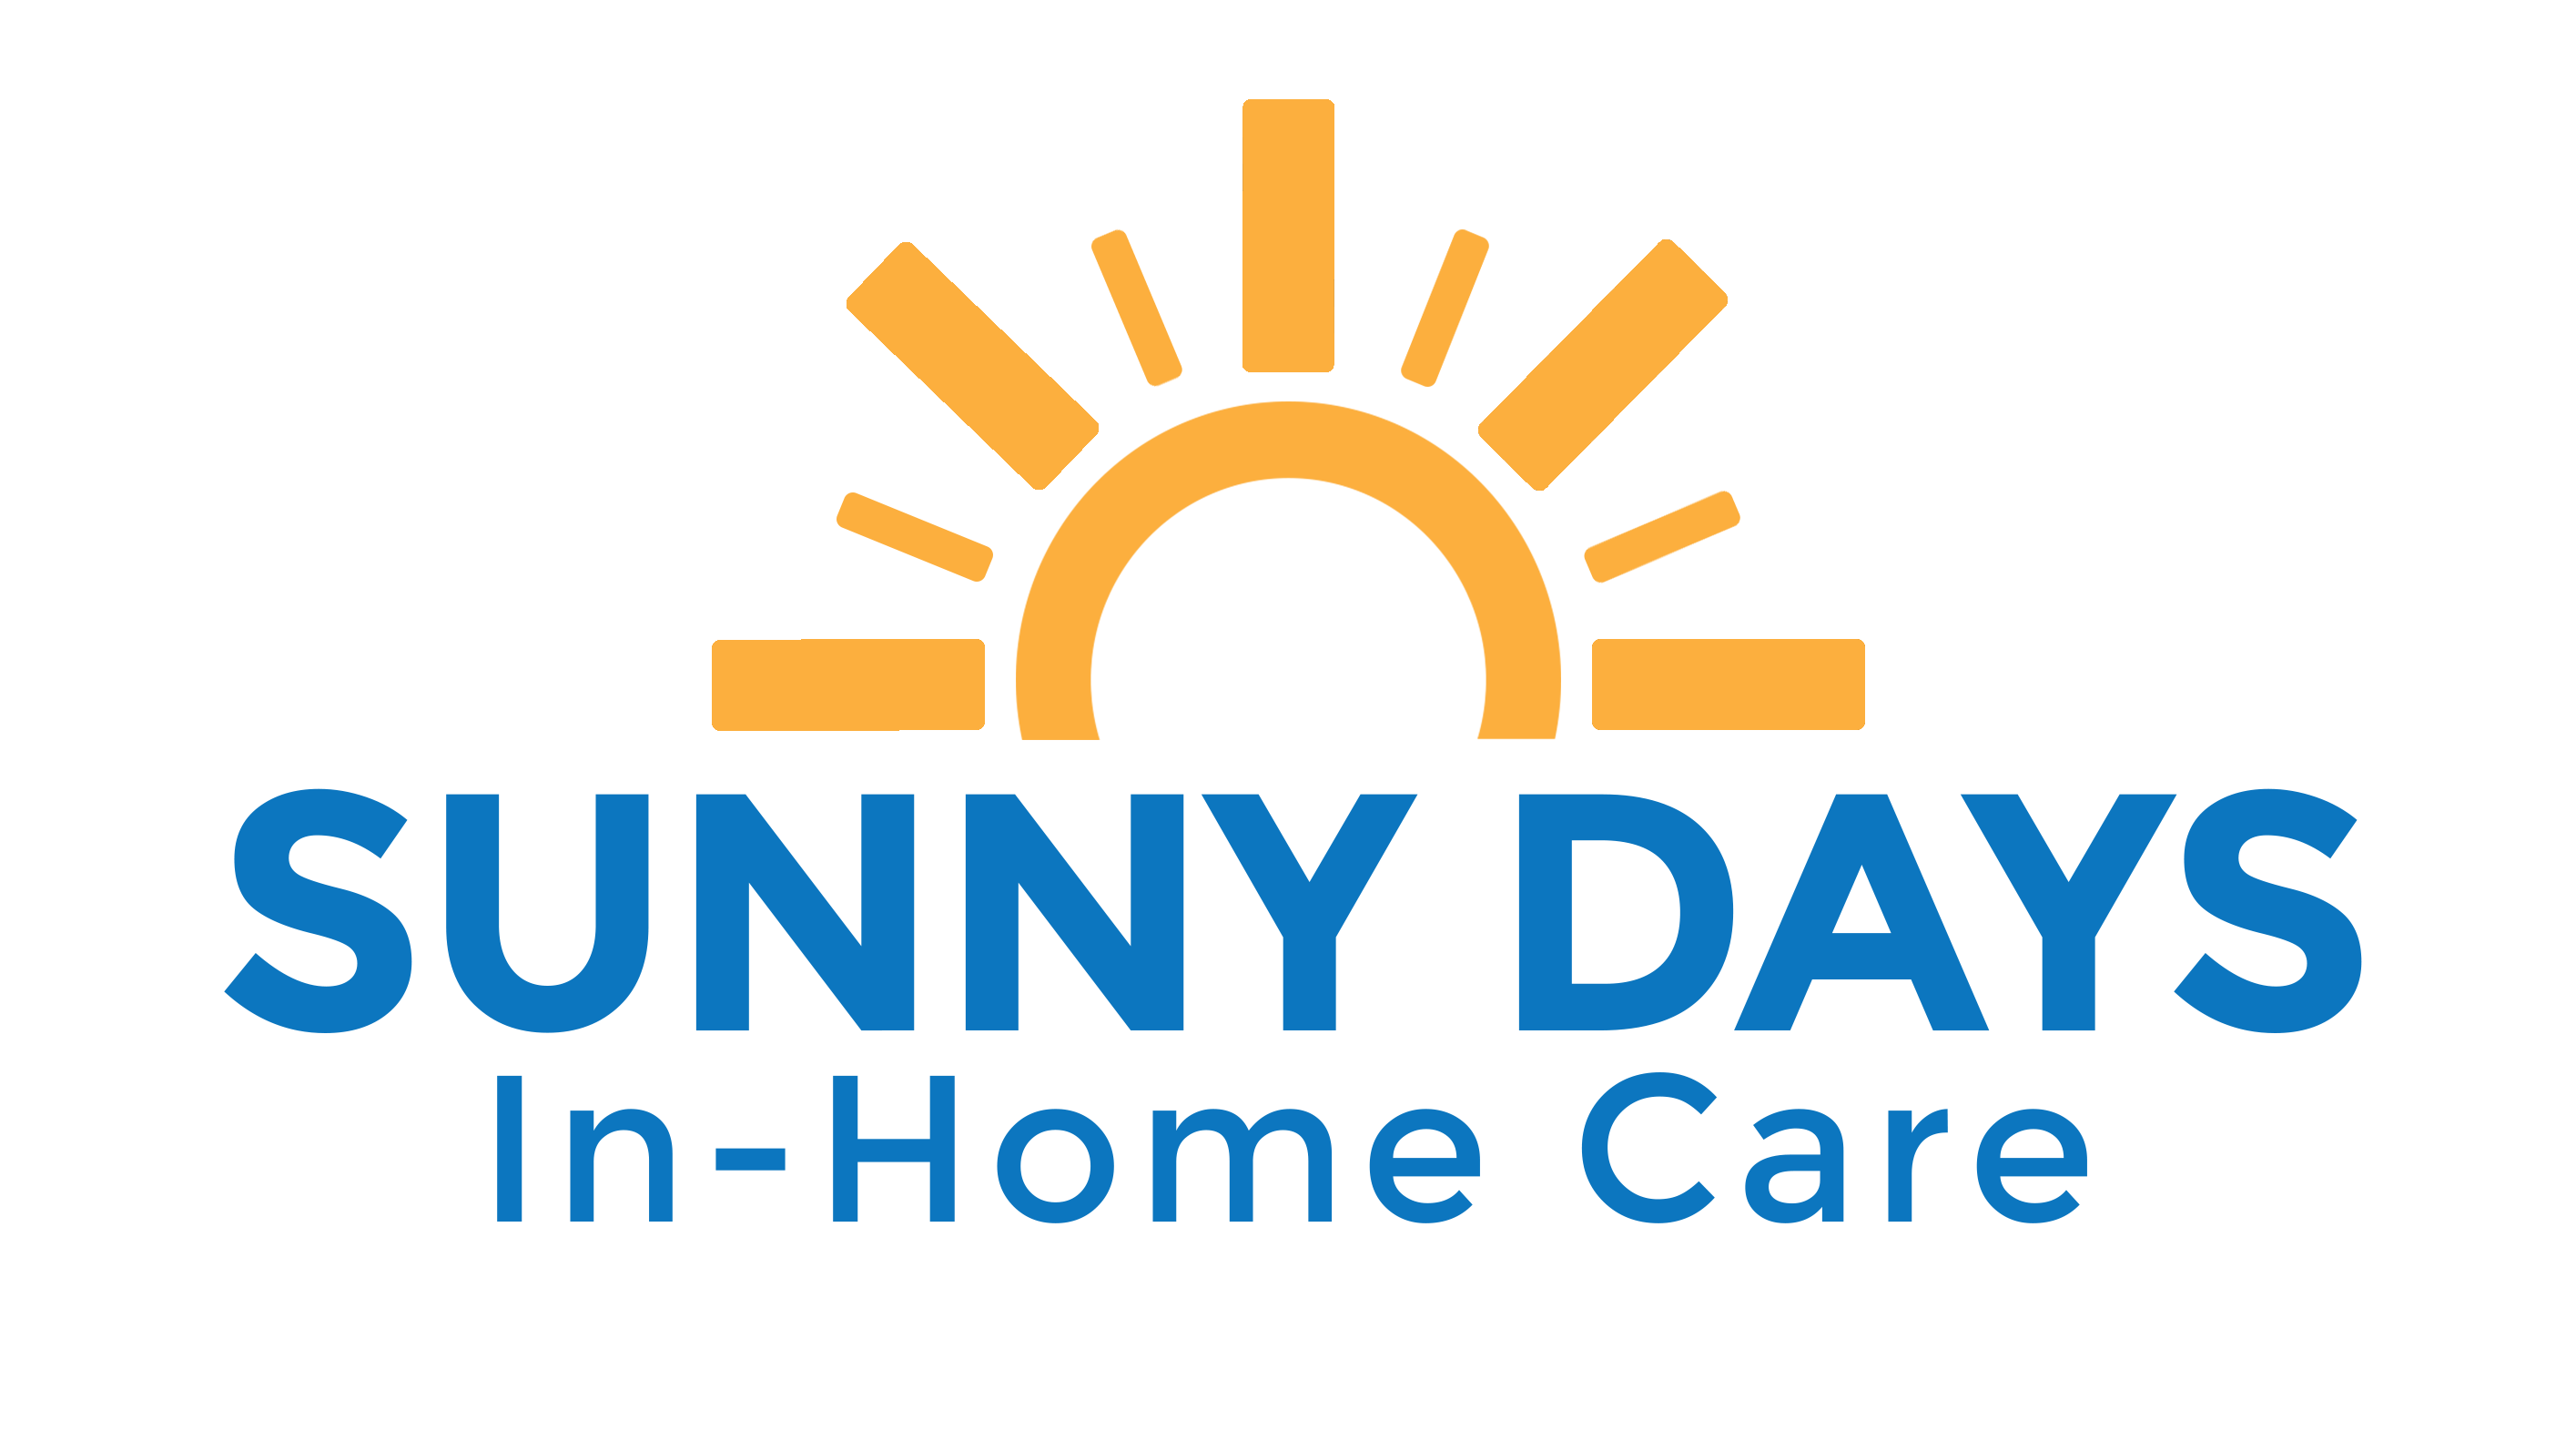 Sunny Days In-Home Care